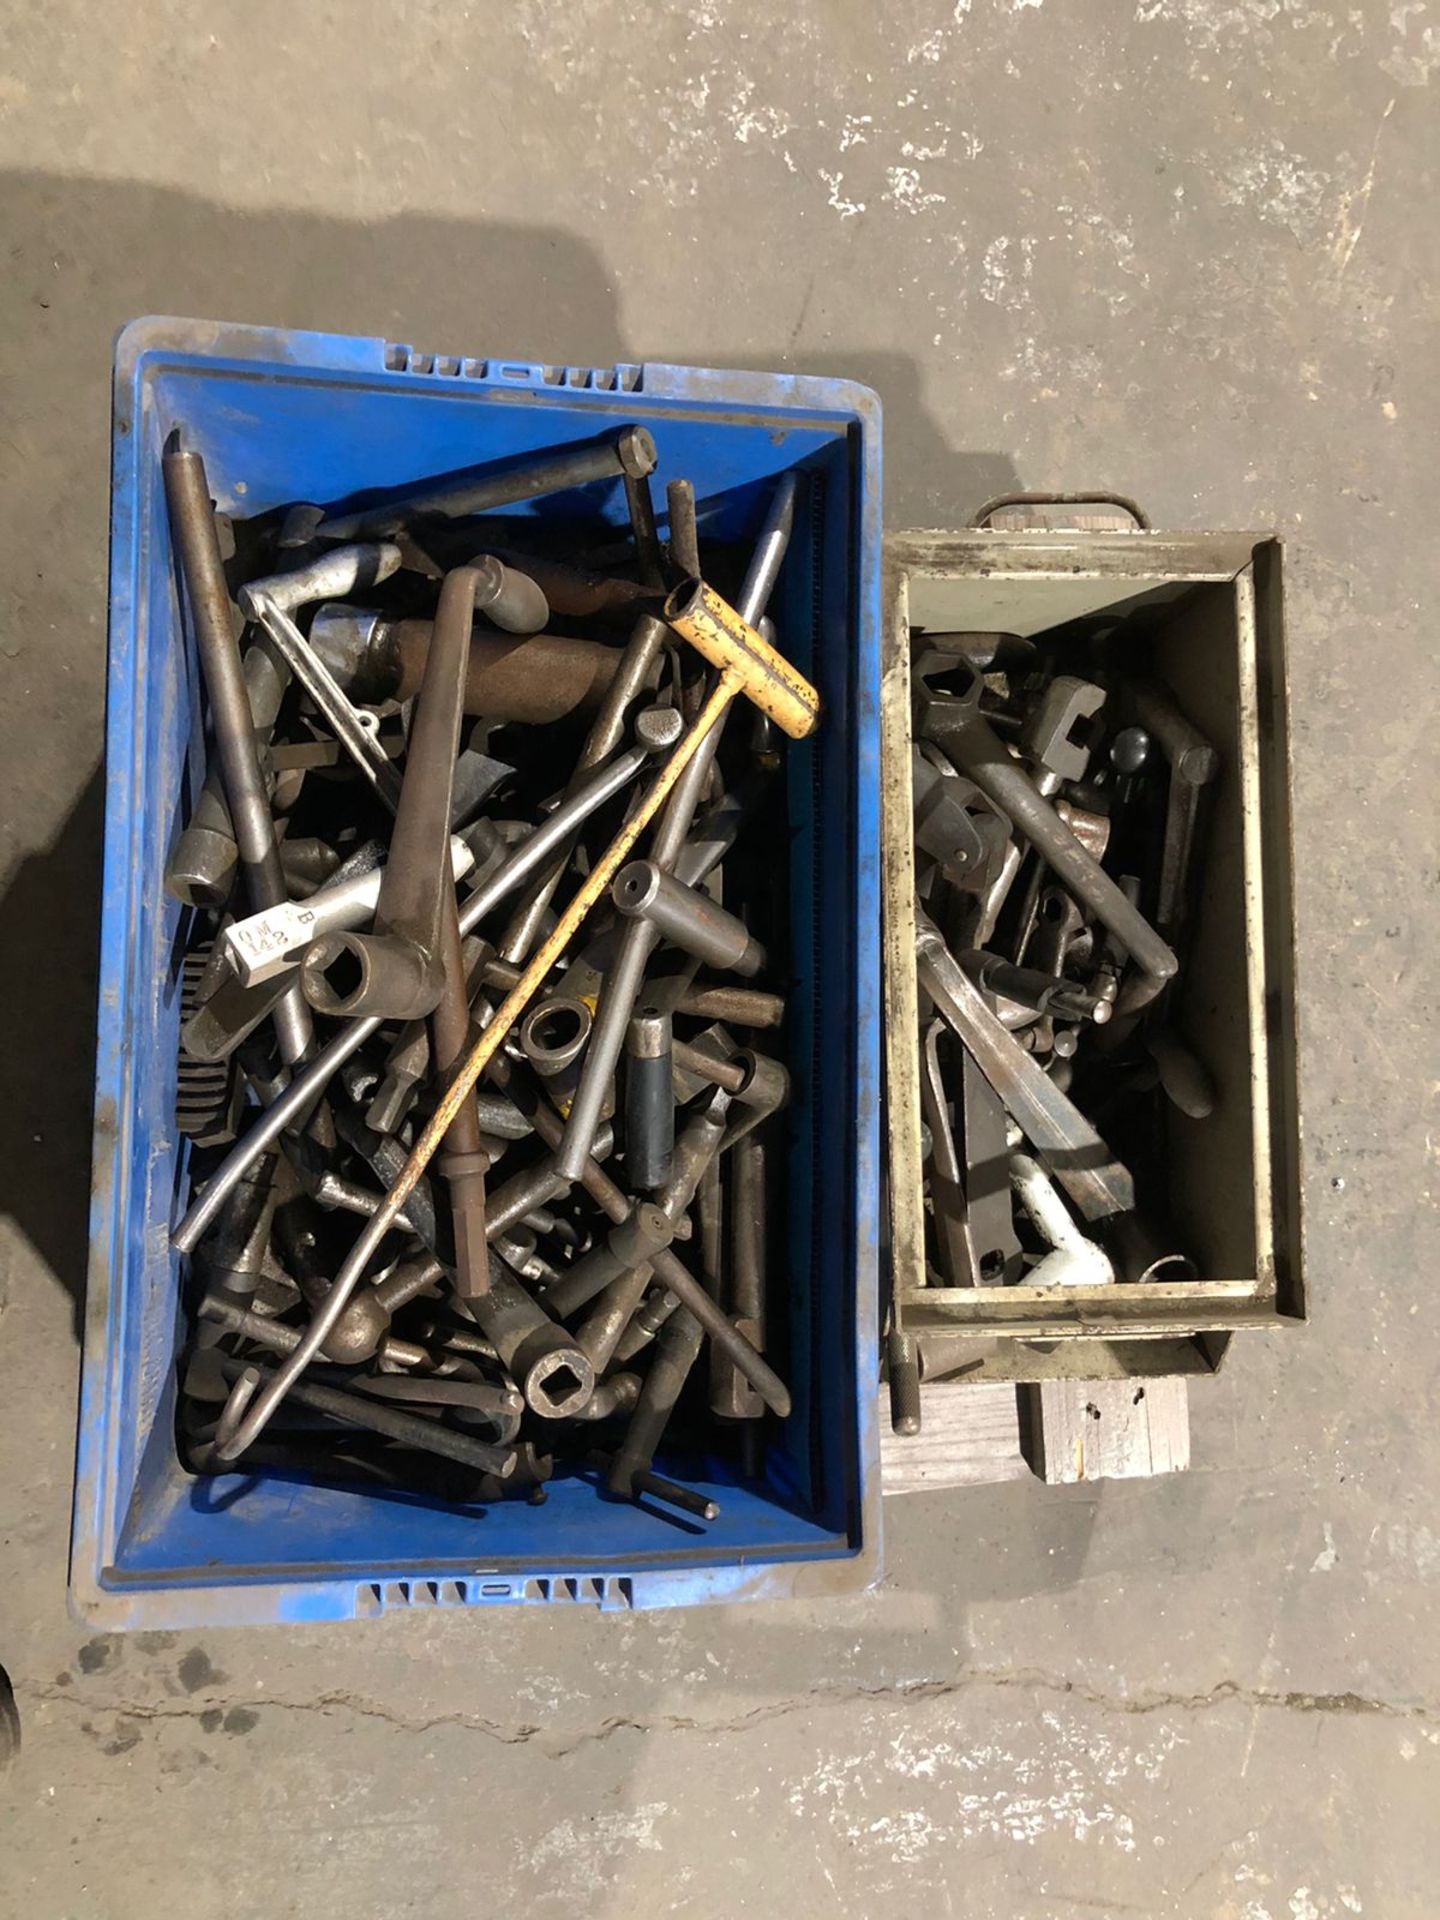 Lot of Misc Wrenches including Lug Wrenches